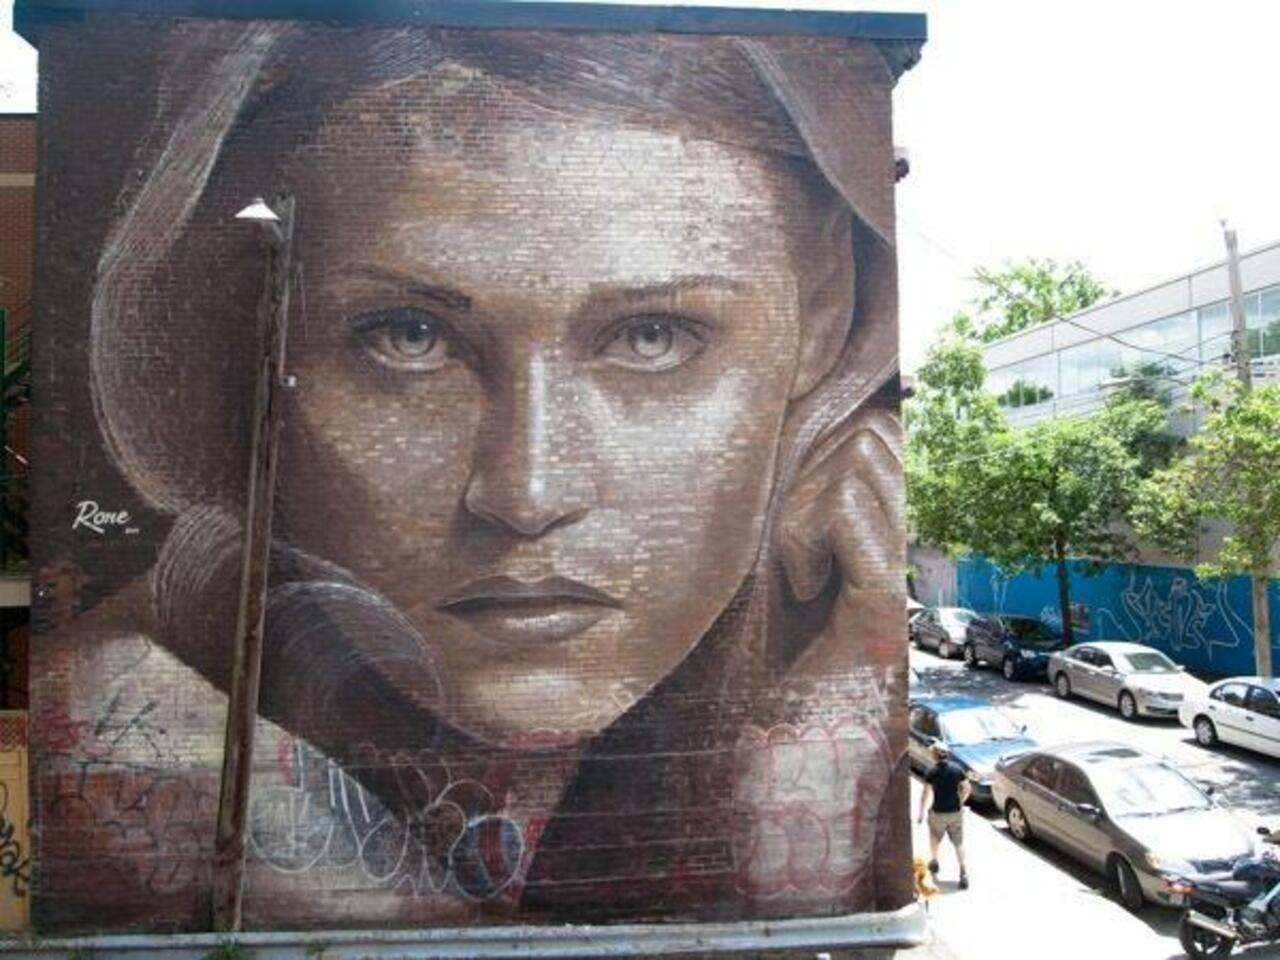 "@brightonseagull: Amazing mural by RONE in Montreal http://t.co/WTCIE4iN49"
#graffiti #streetart #urbanart #spraypaint #stencil #mural #art